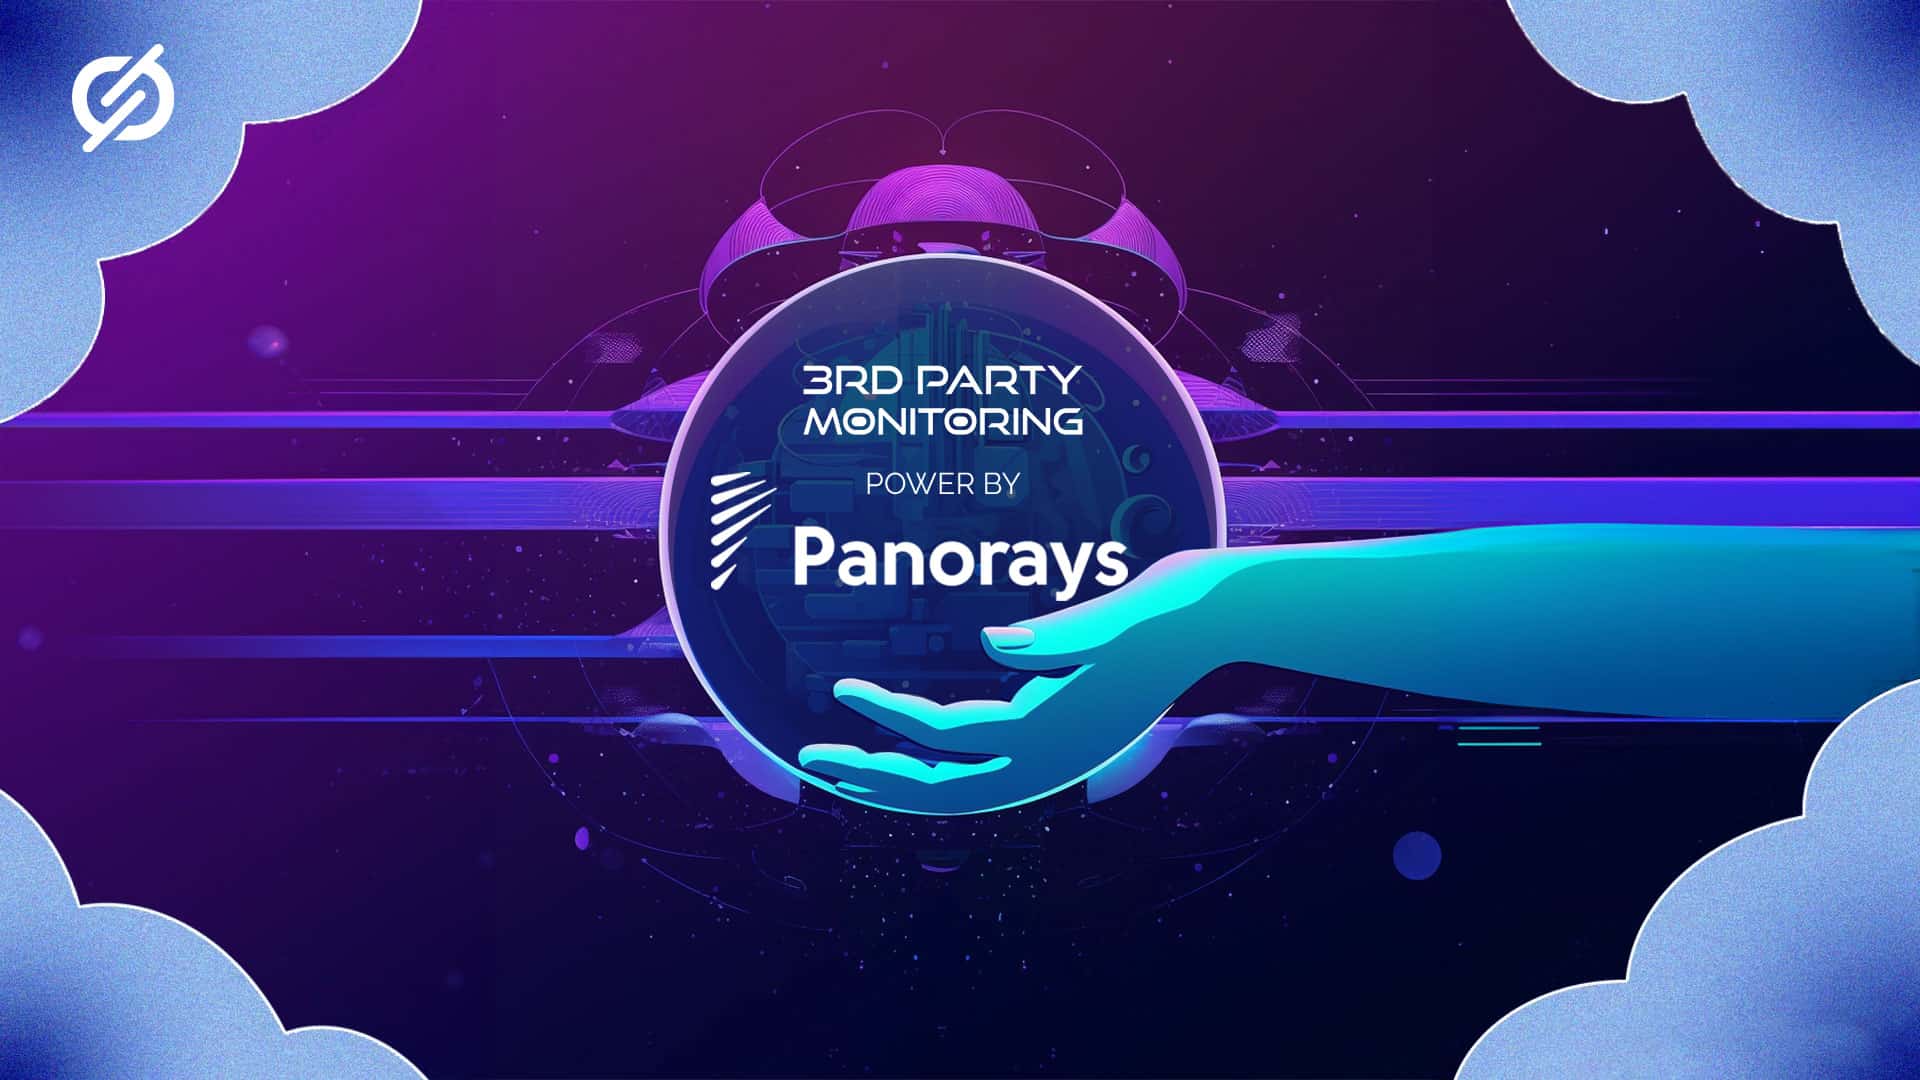 Core to Cloud partners with Panorays to bring third party risk management.